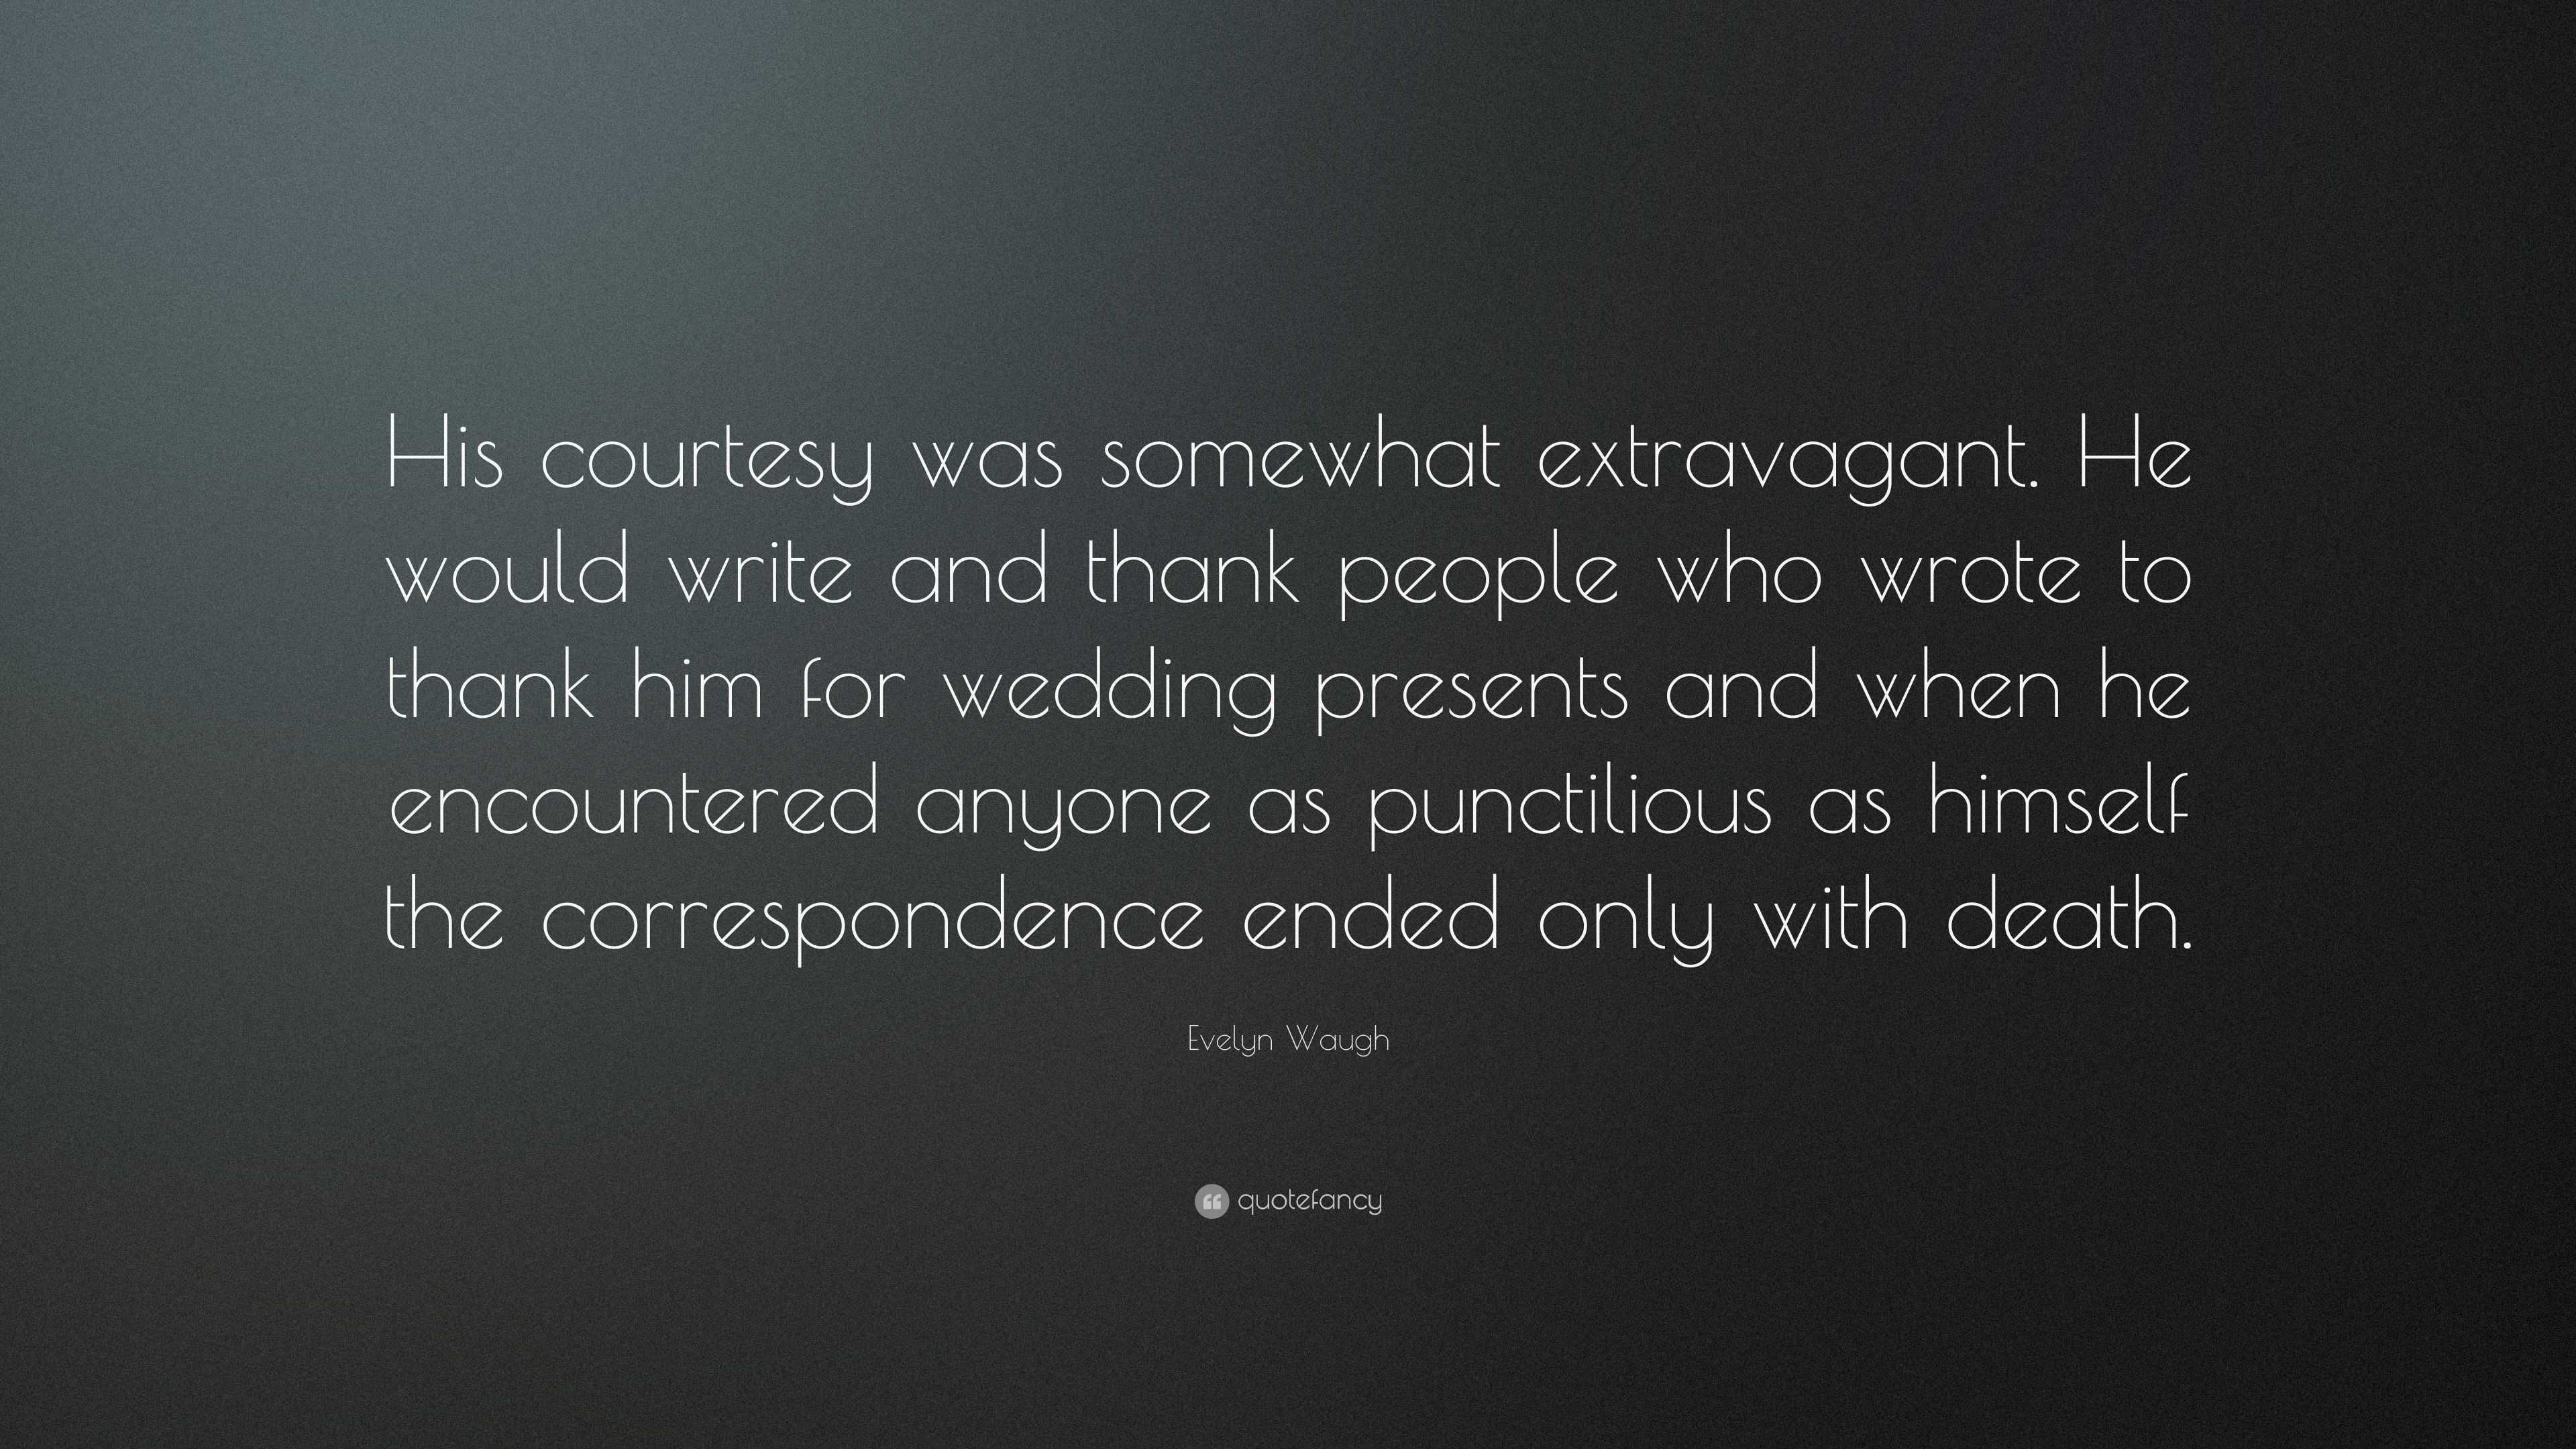 Evelyn Waugh Quote: “His courtesy was somewhat extravagant. He